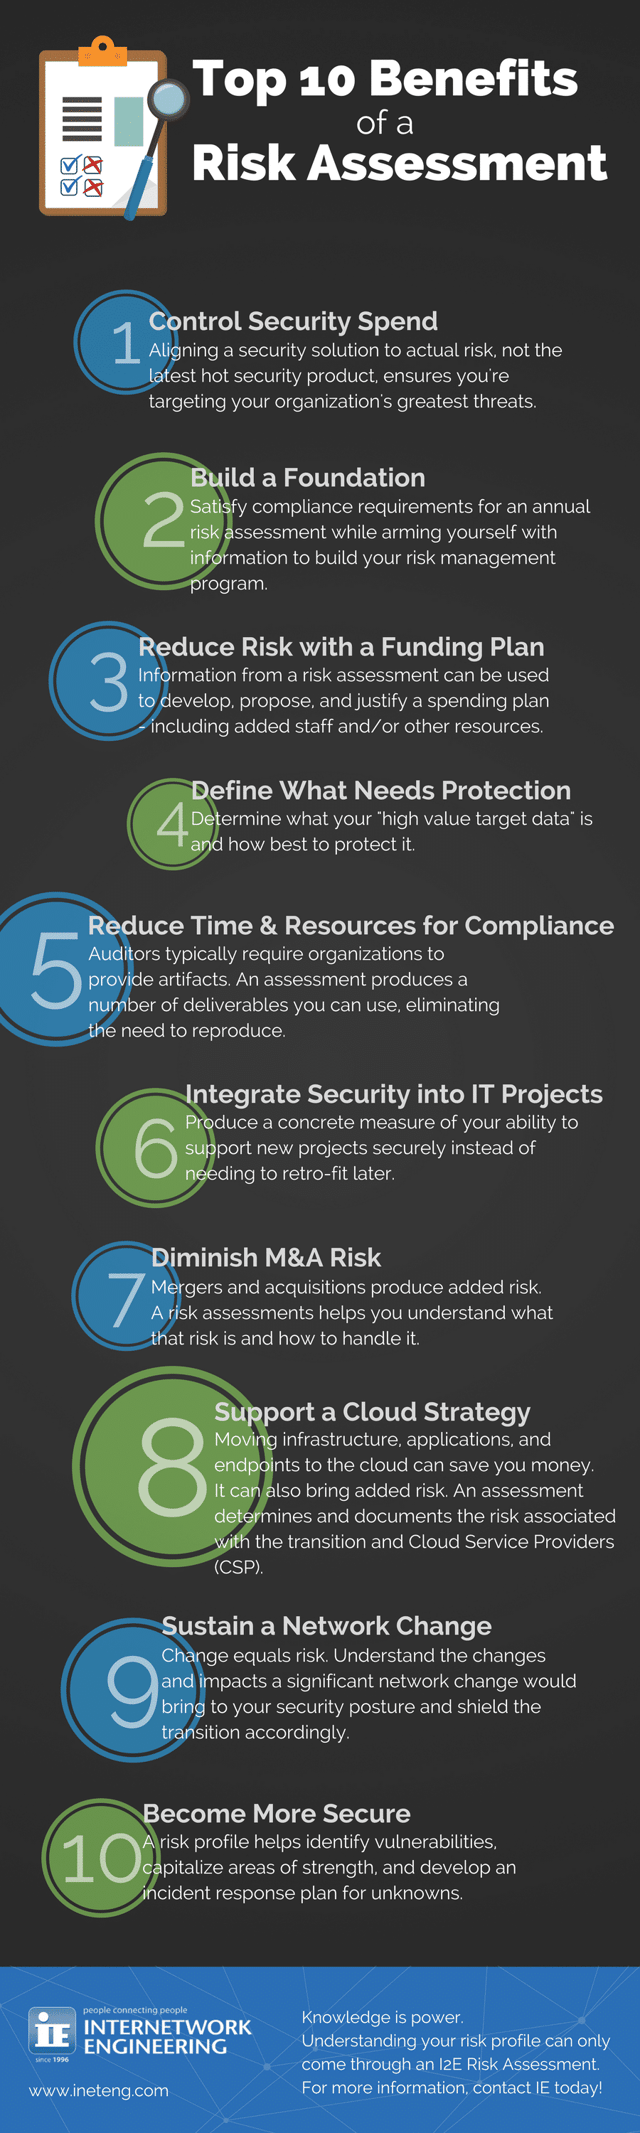 Top 10 Benefits of a Risk Assessment